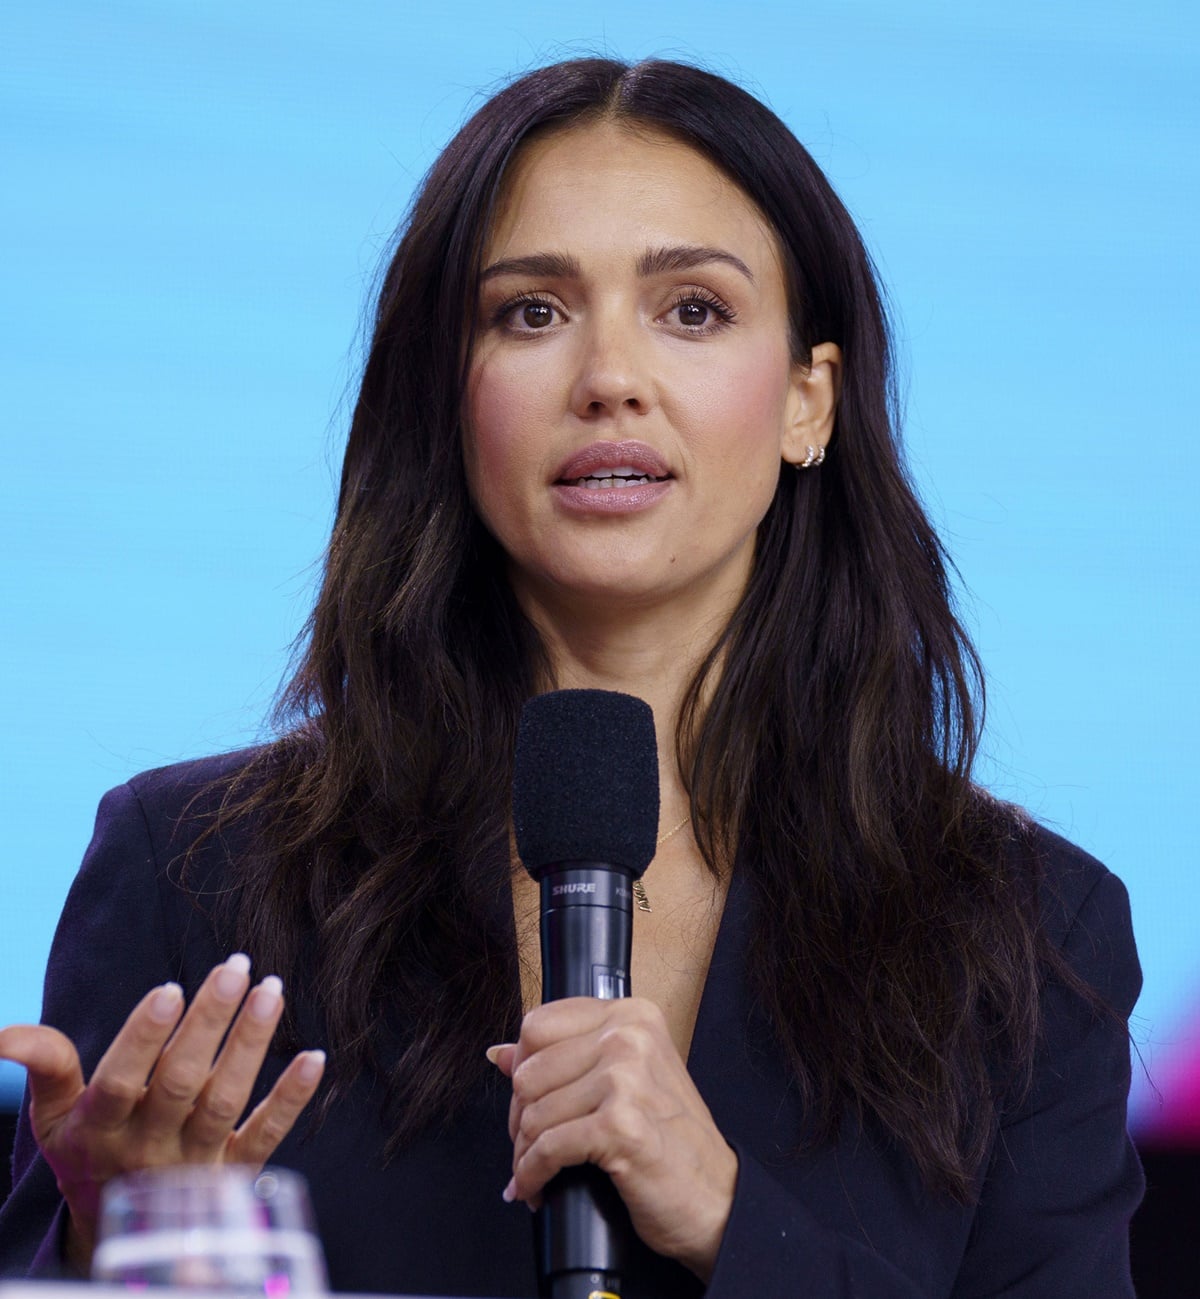 Jessica Alba speaks at the digital X special event, a leading Europe digitization event in Cologne, Germany